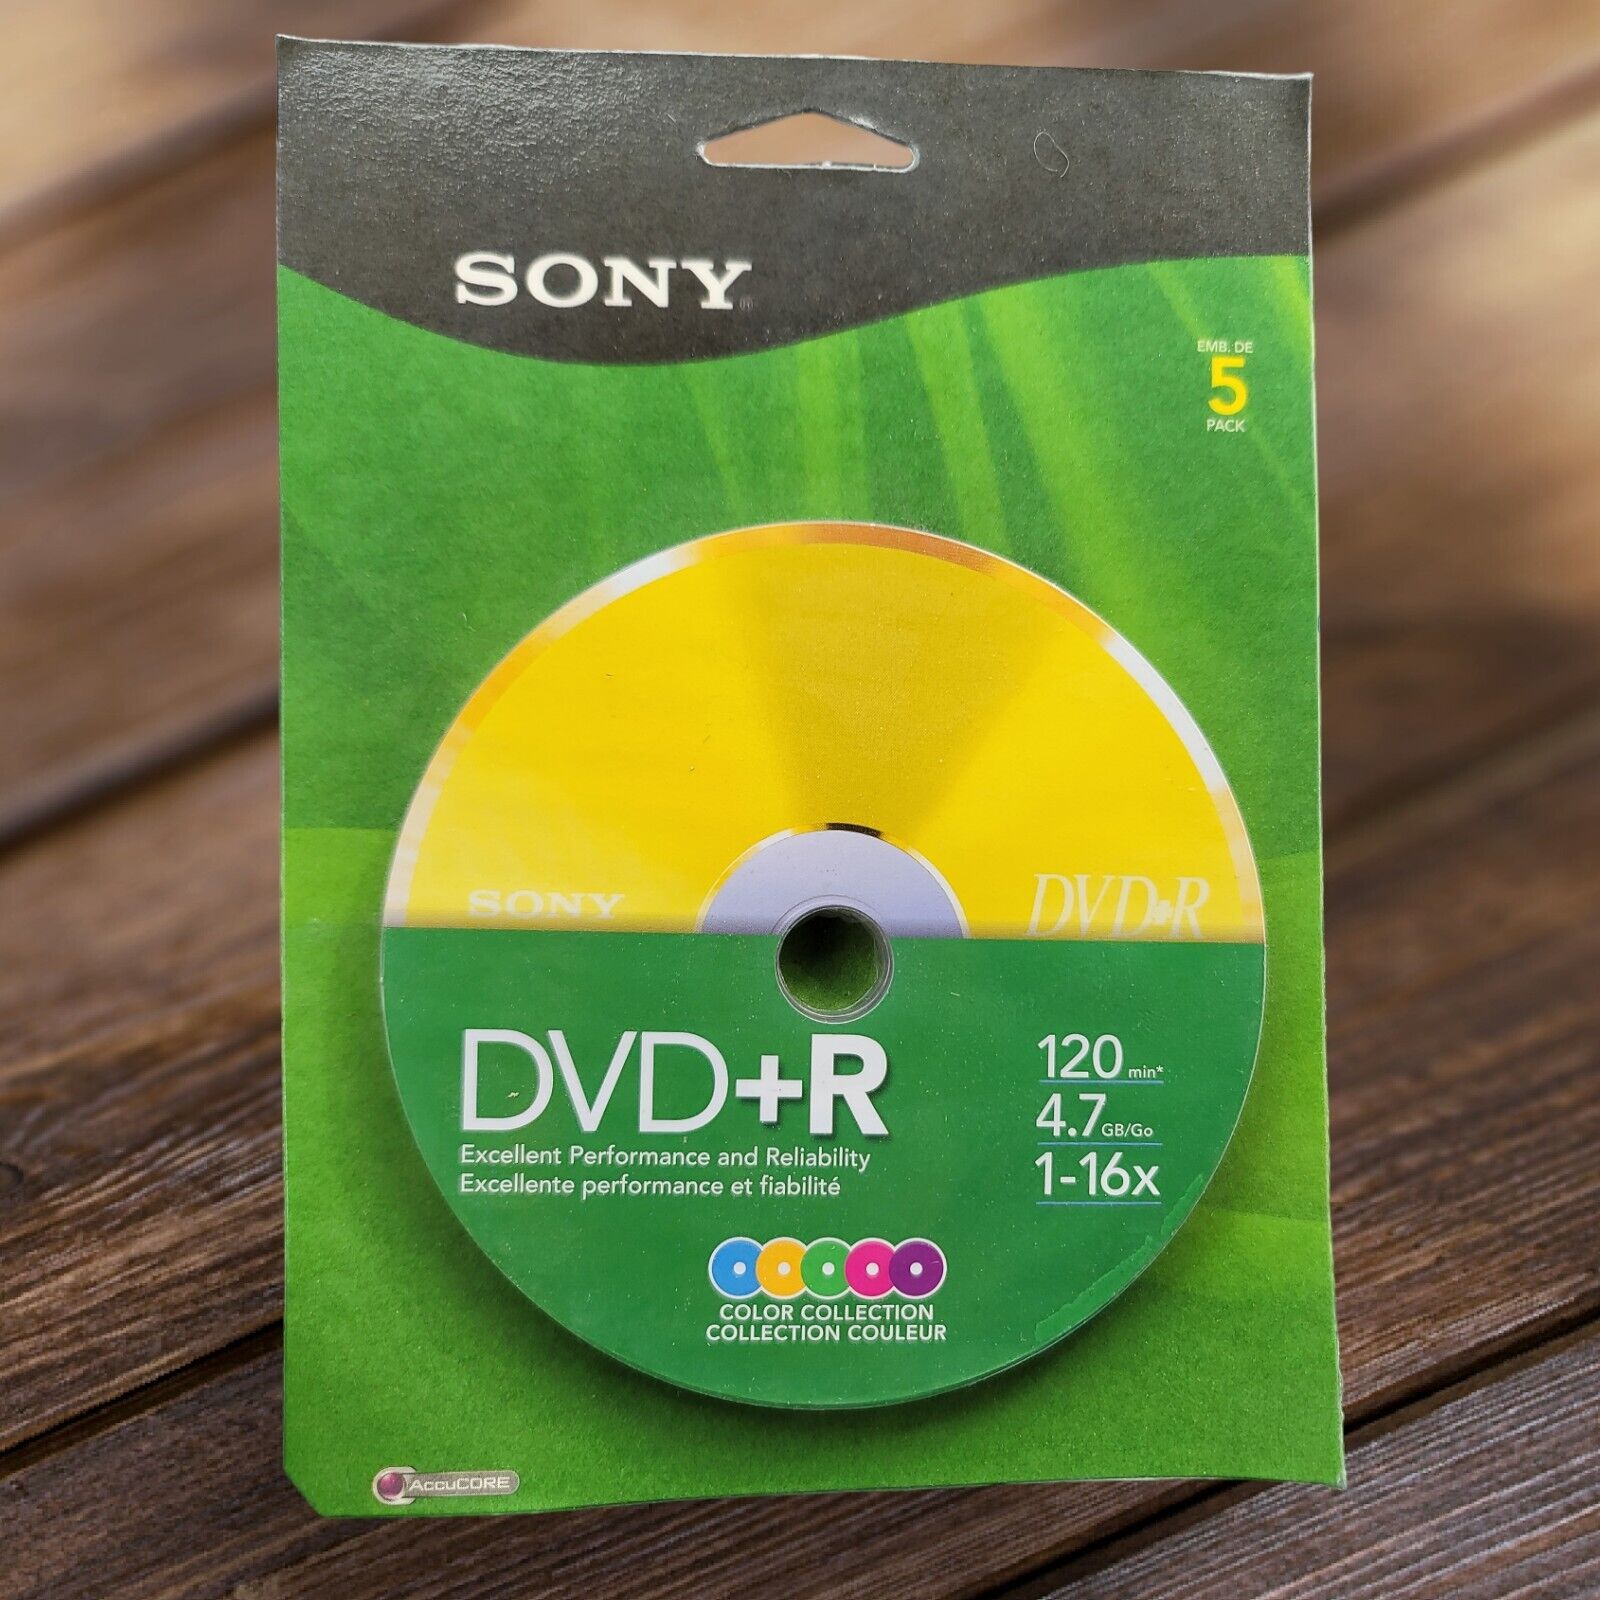 NEW Sony DVD+R 5 pack 120 minutes 1x-16x Speed 4.7 GB Color Collection Discs